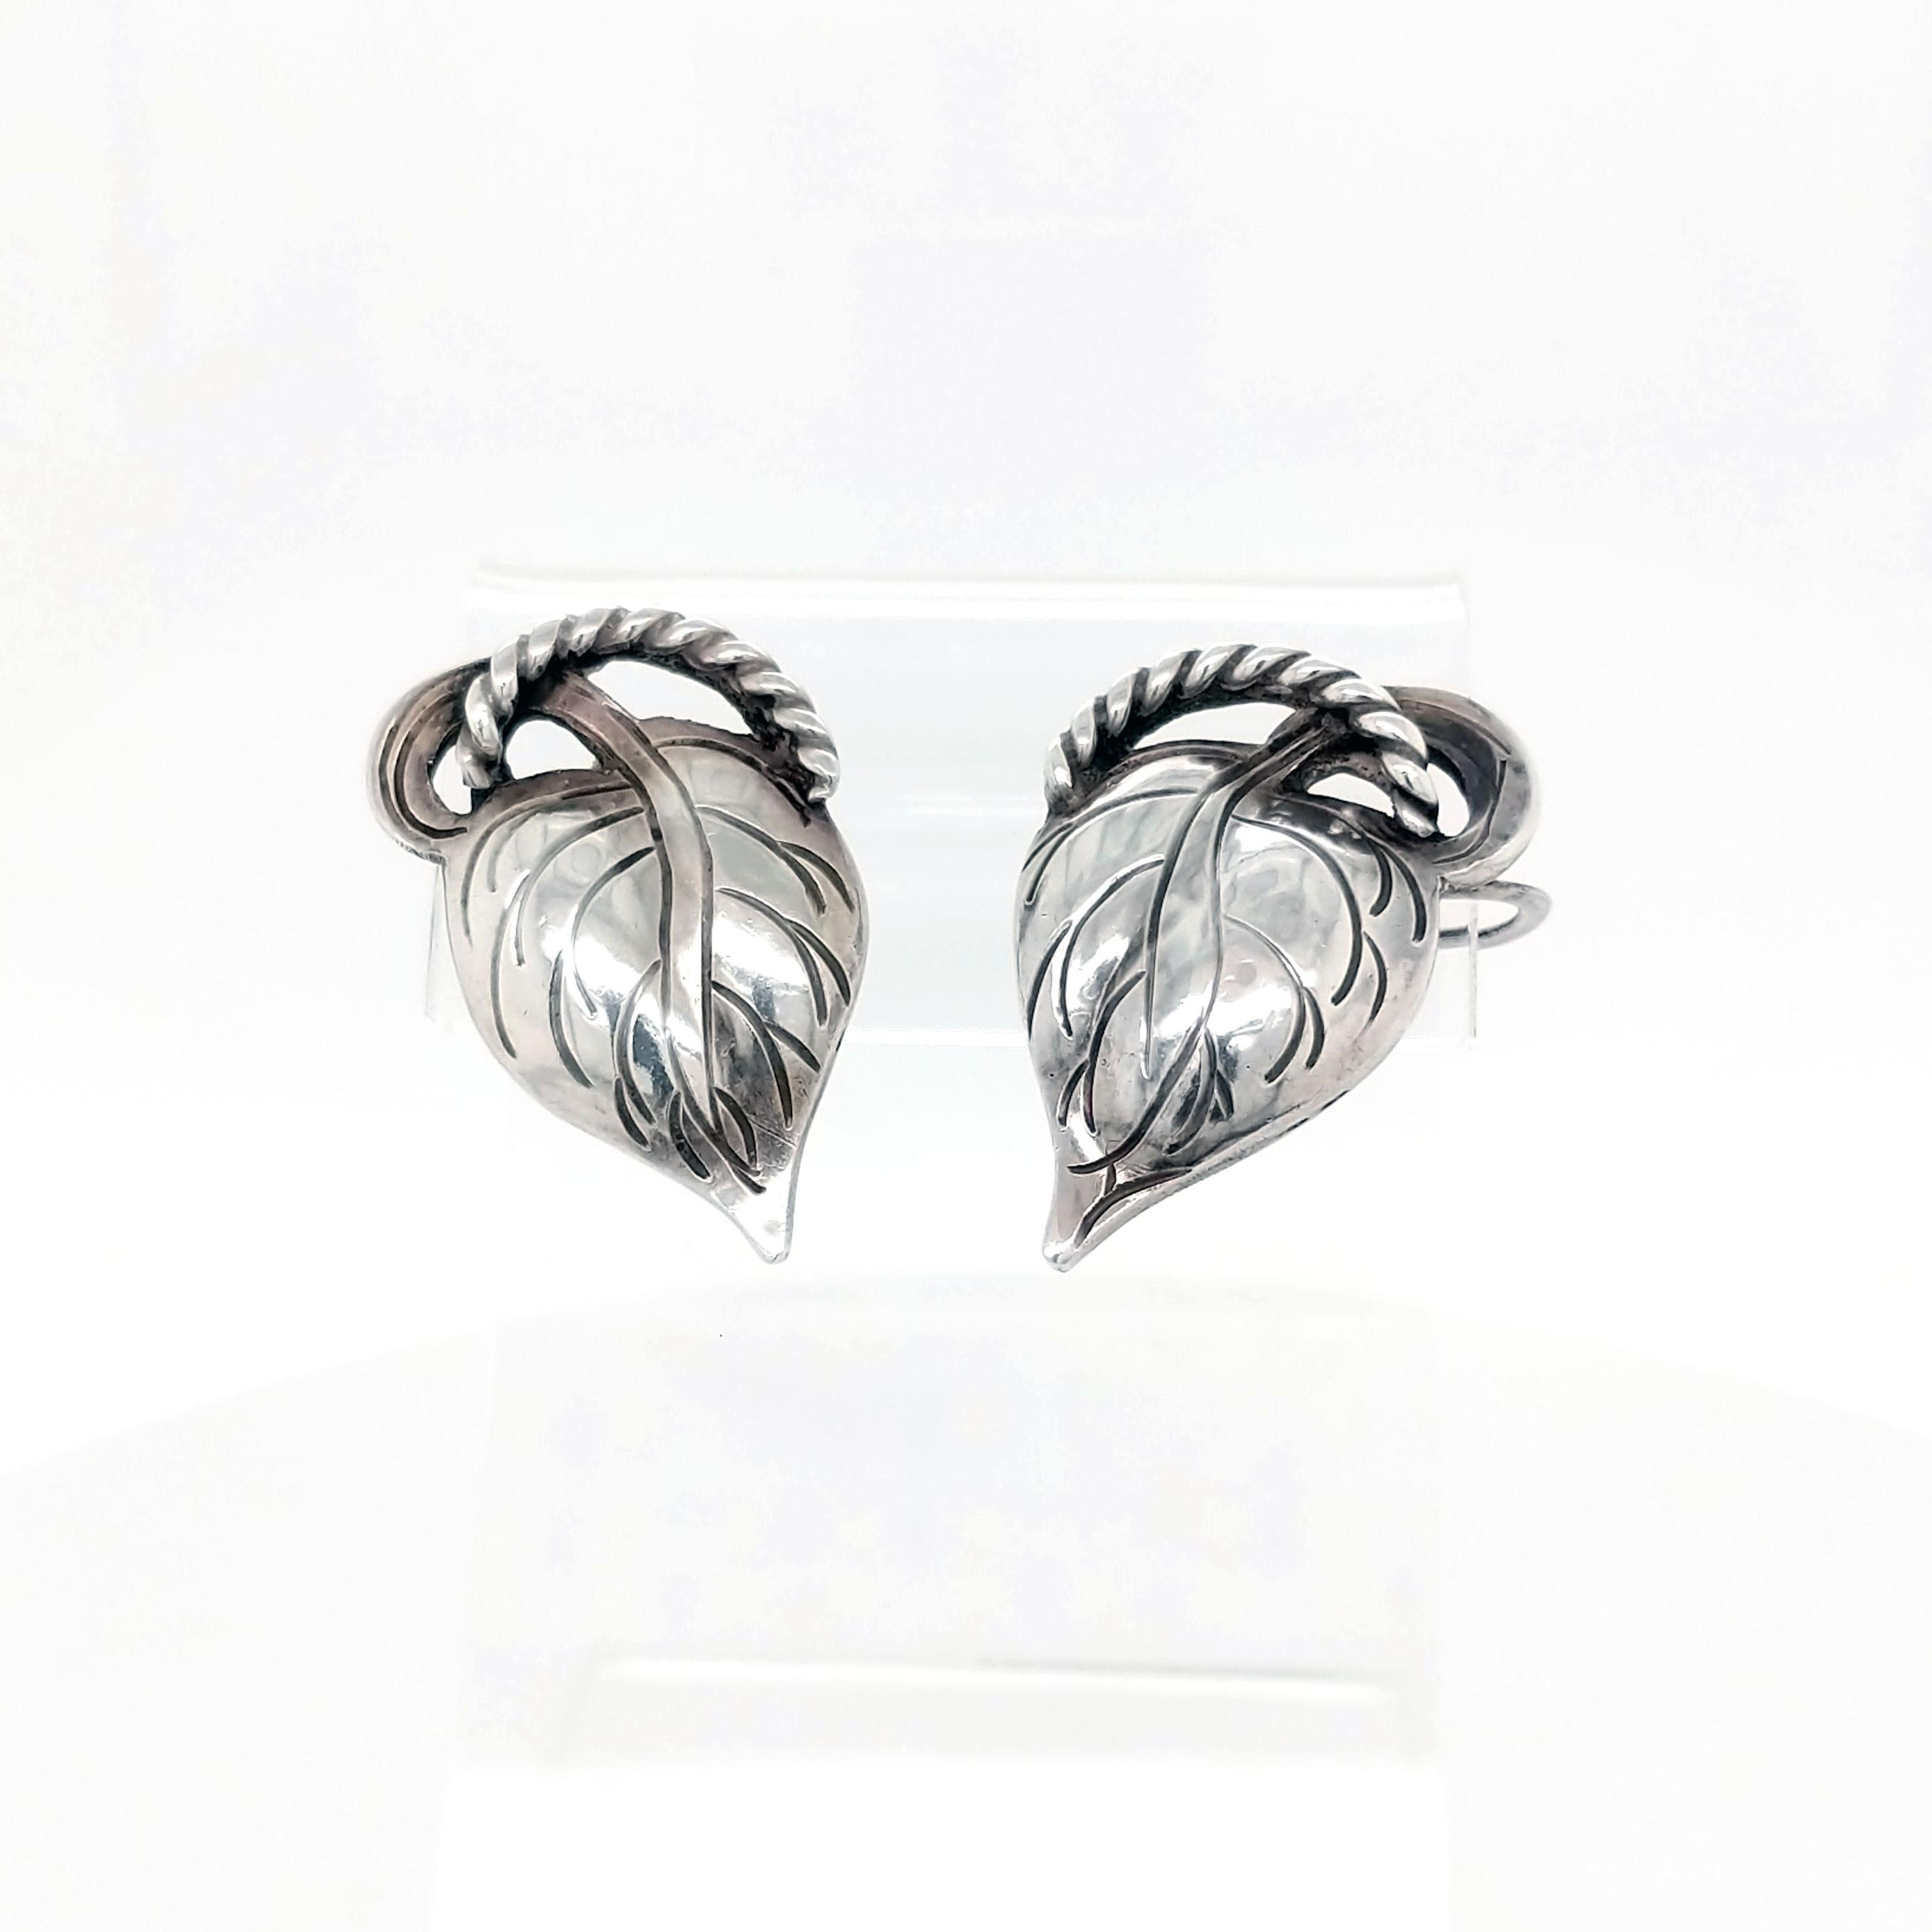 These earrings are lovely! Made by Kalo, the most prominent maker of Arts & Crafts style jewelry in Chicago in the early 1900s, these sterling silver leaves are sure to perfectly frame your face and compliment any outfit you pair them with! These